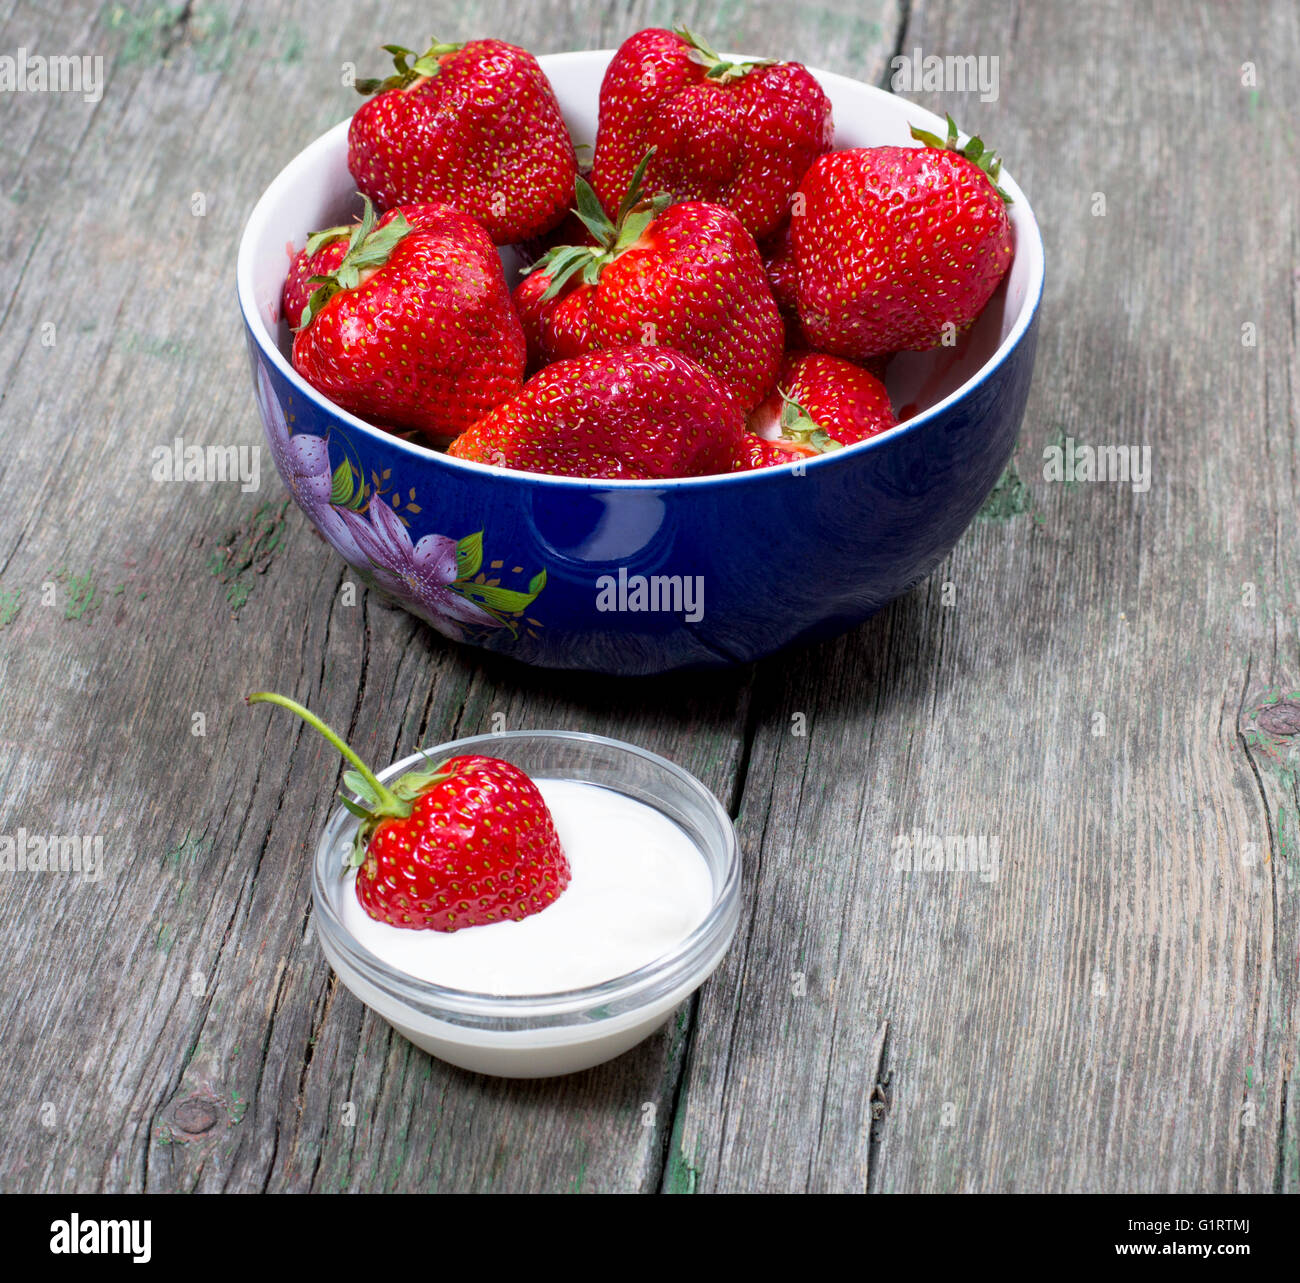 plate strawberry and one strawberry in a saucer with cream, on a wooden table Stock Photo